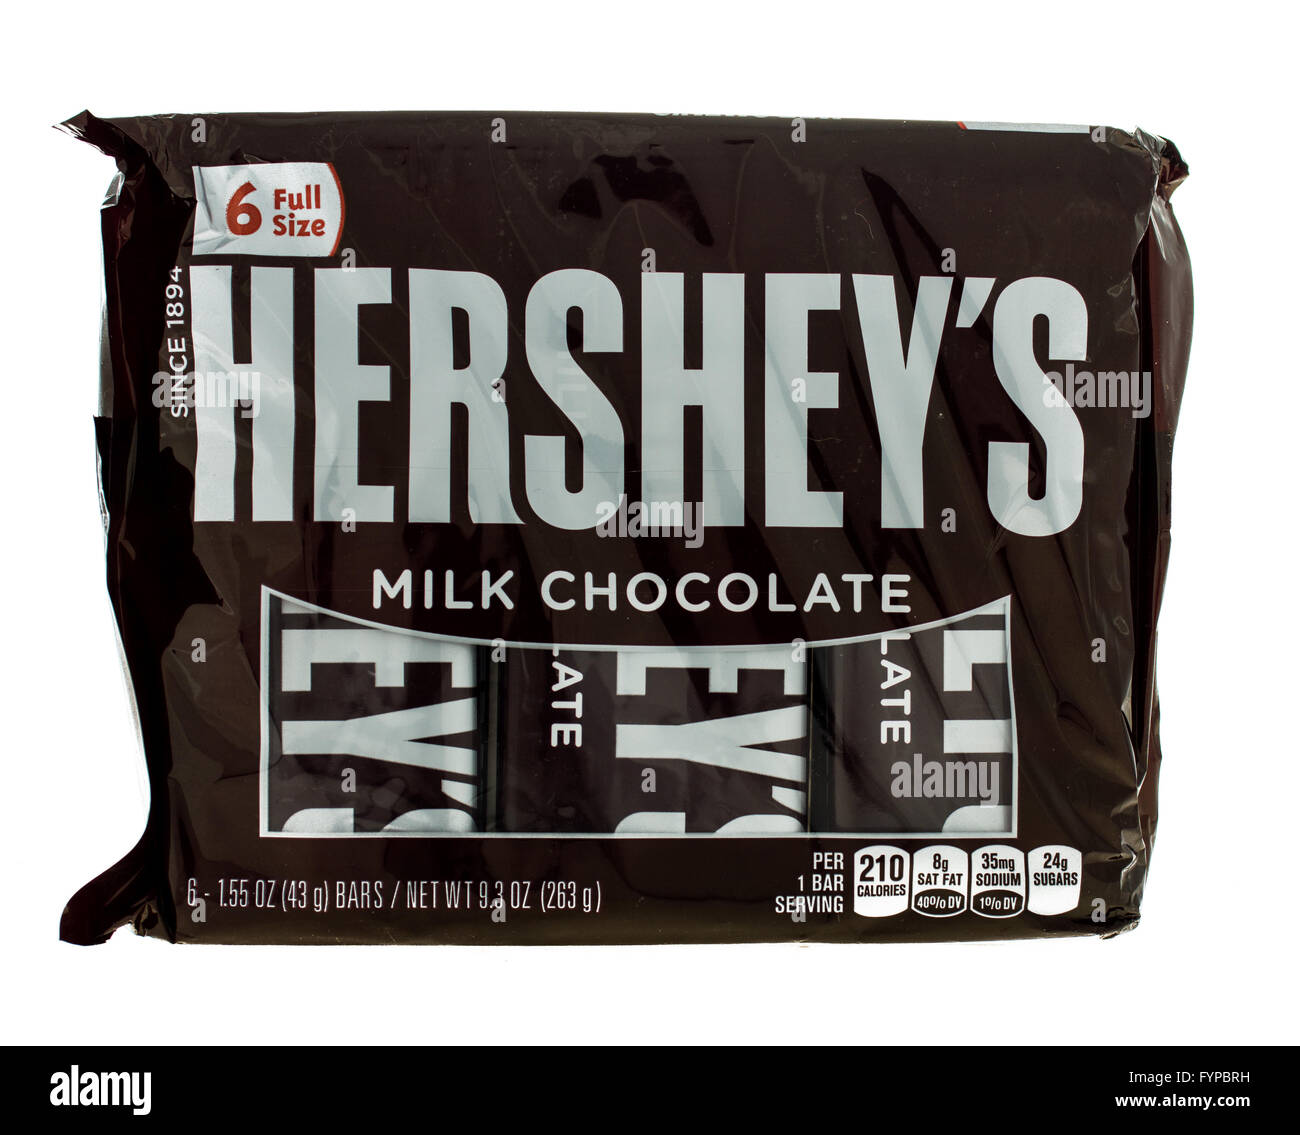 winneconne, WI - 5  February 2015: Package of Hershey's Milk Chocolate candy bar's.  Hershey was founded in 1894. Stock Photo